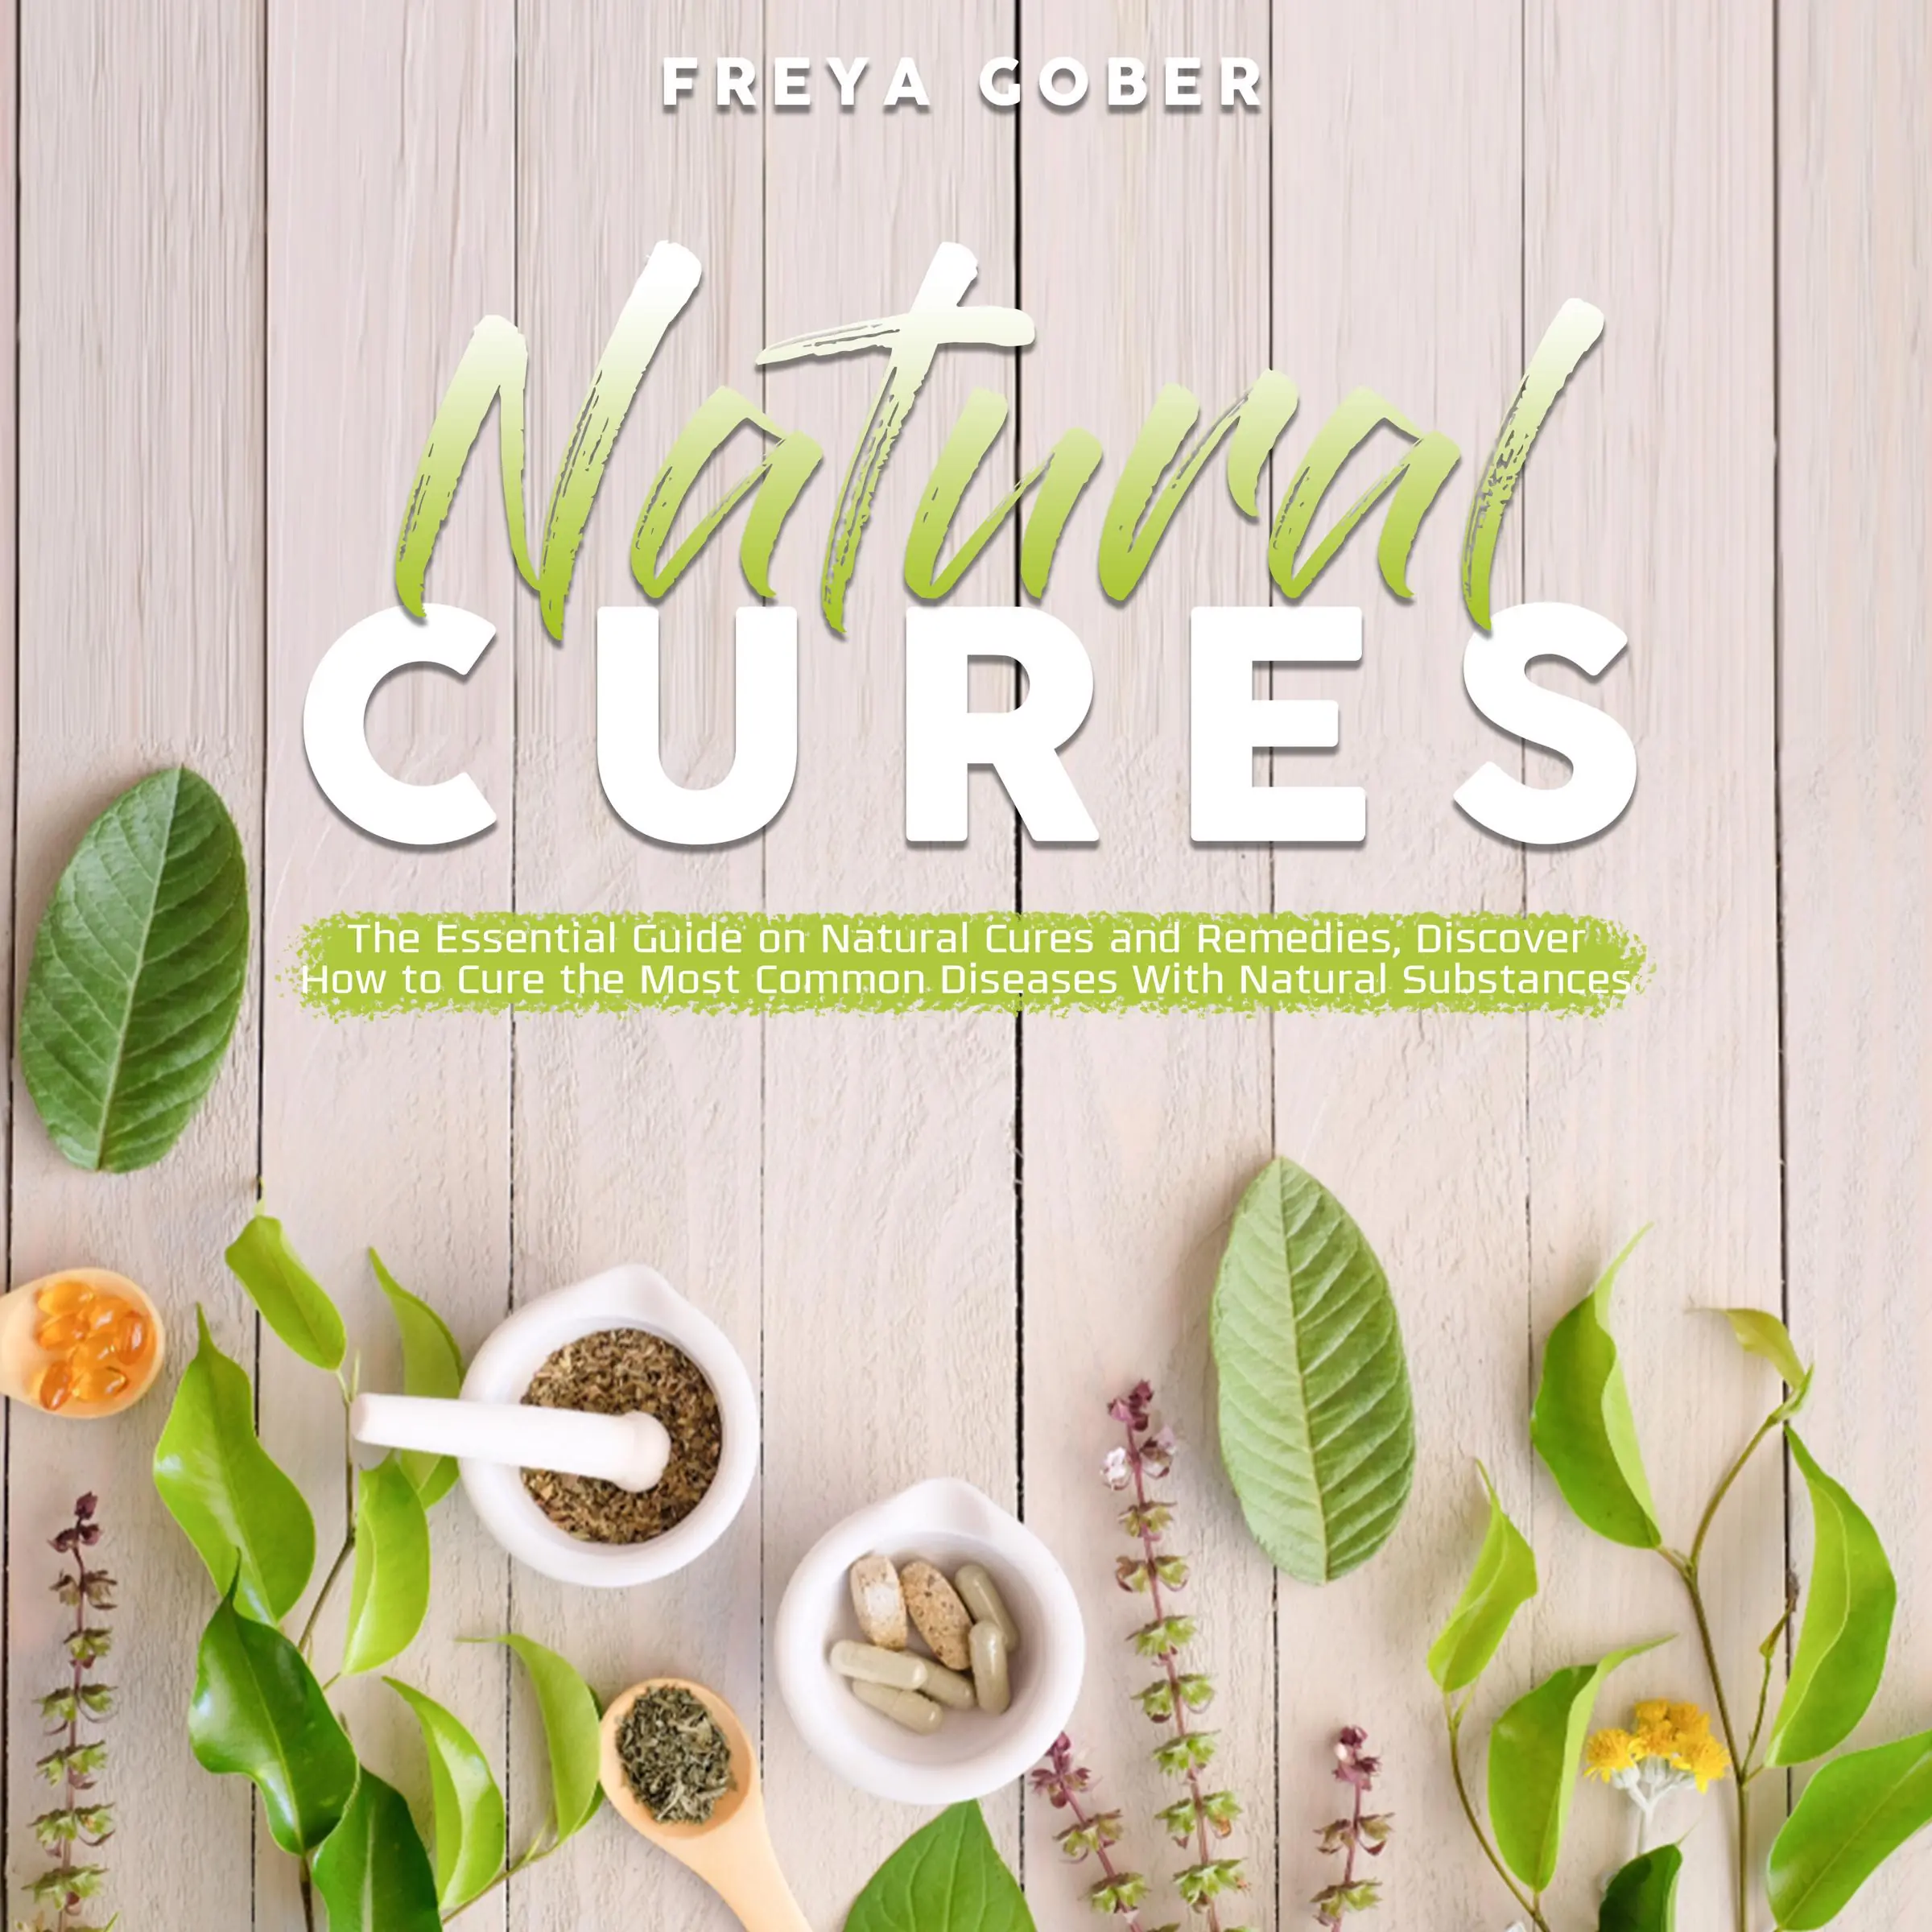 Natural Cures: The Essential Guide on Natural Cures and Remedies, Discover How to Cure the Most Common Diseases With Natural Substances Audiobook by Freya Gober